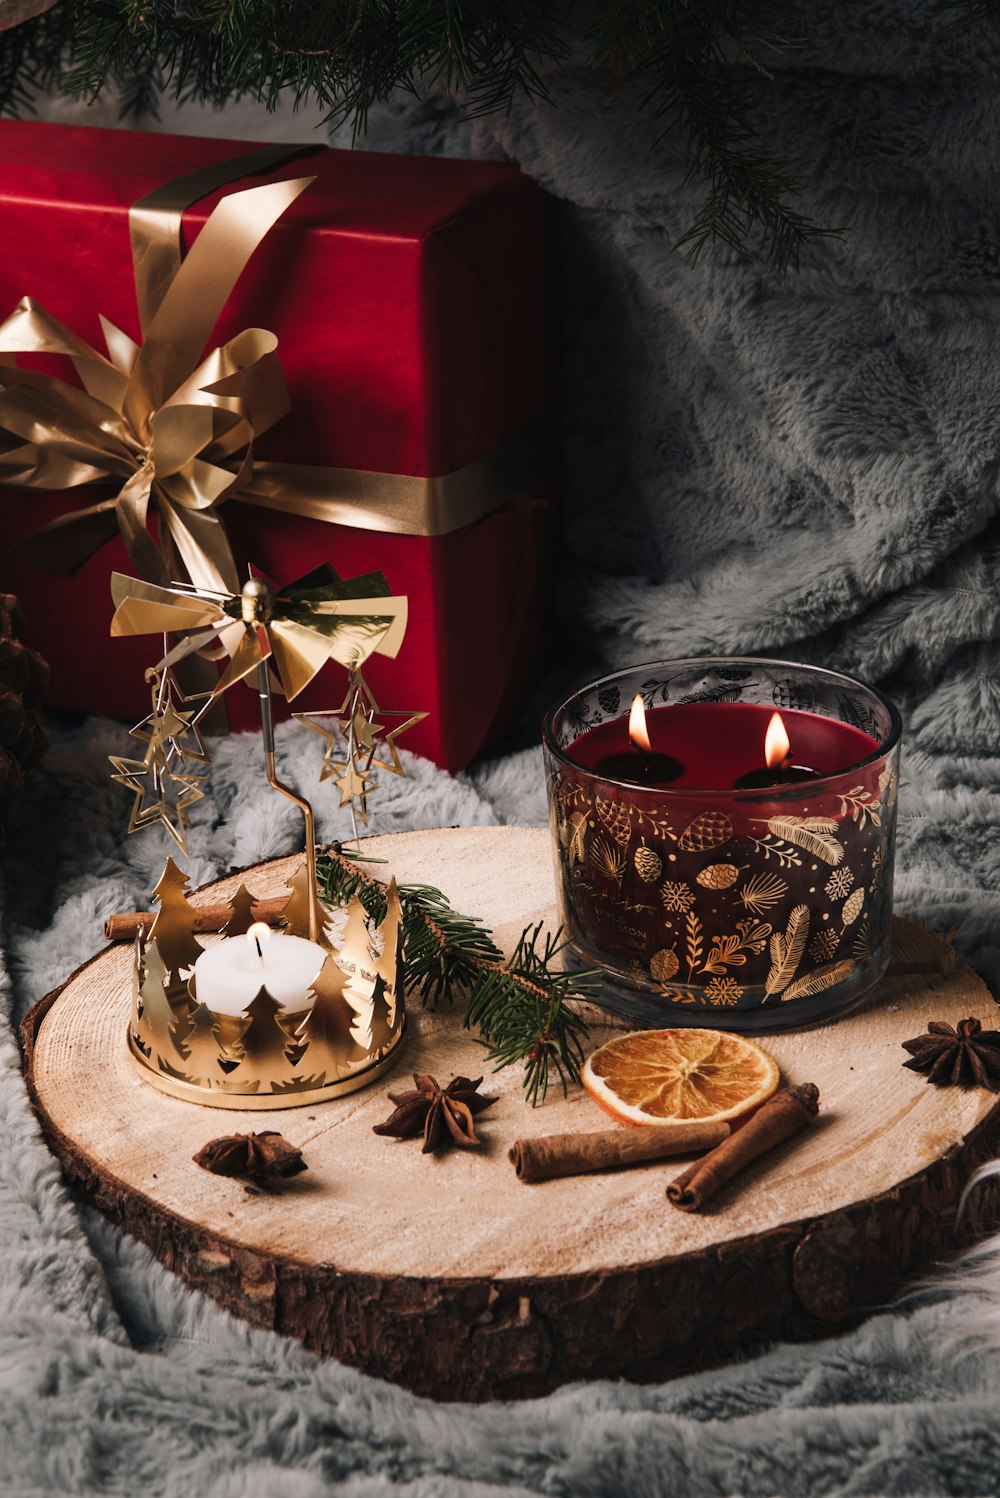 a candle and a gift on a wooden table